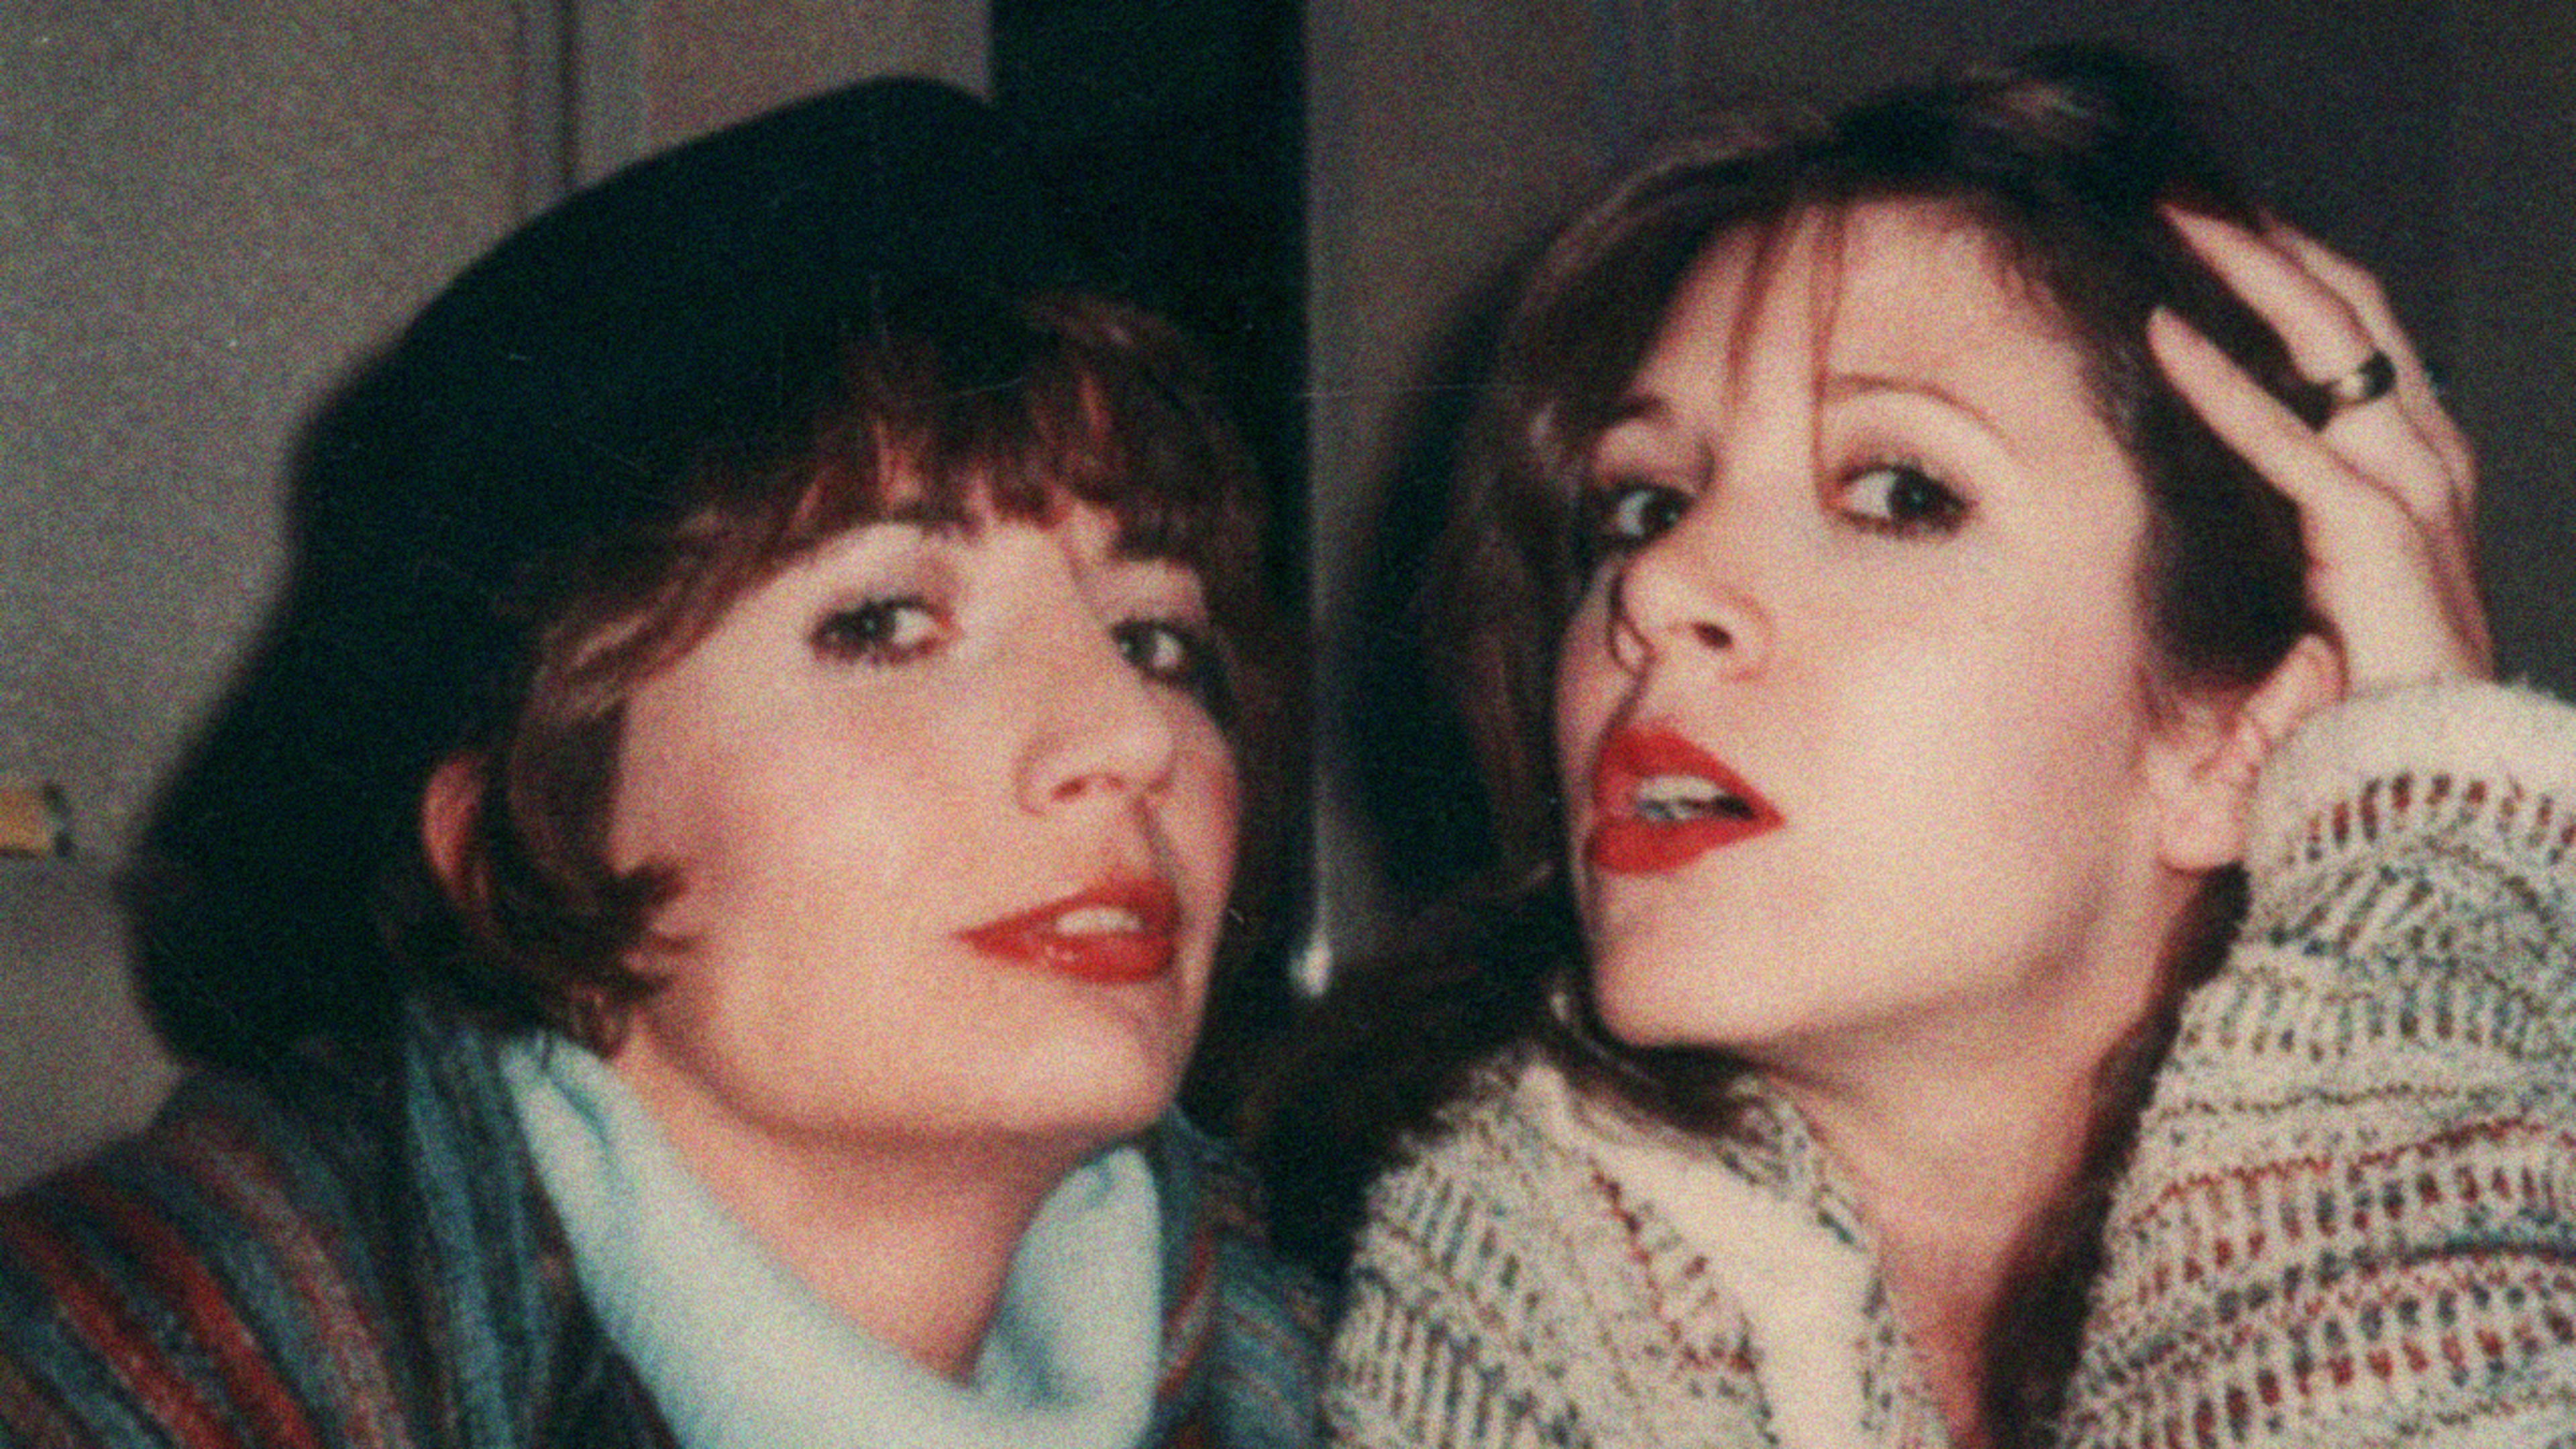 This captivating photo of Penny Marshall and Carrie Fisher is going viral after Marshall’s death